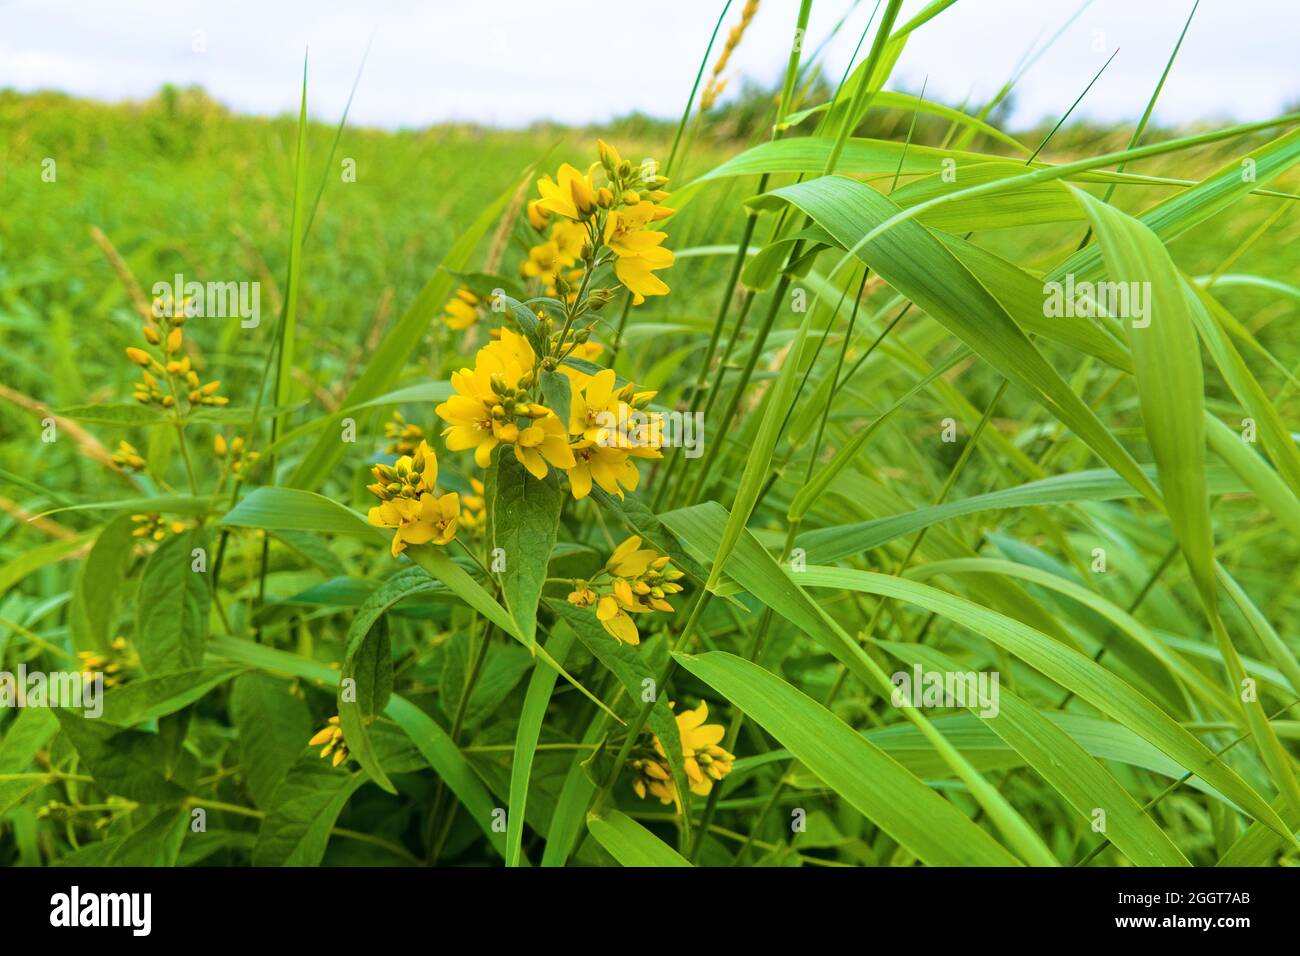 Haughland heavy grass. Golden Loosestrife (Willow-wort, Lysimachia vulgaris) on water (bottomland) meadows. The plant contains dyes that were used to Stock Photo